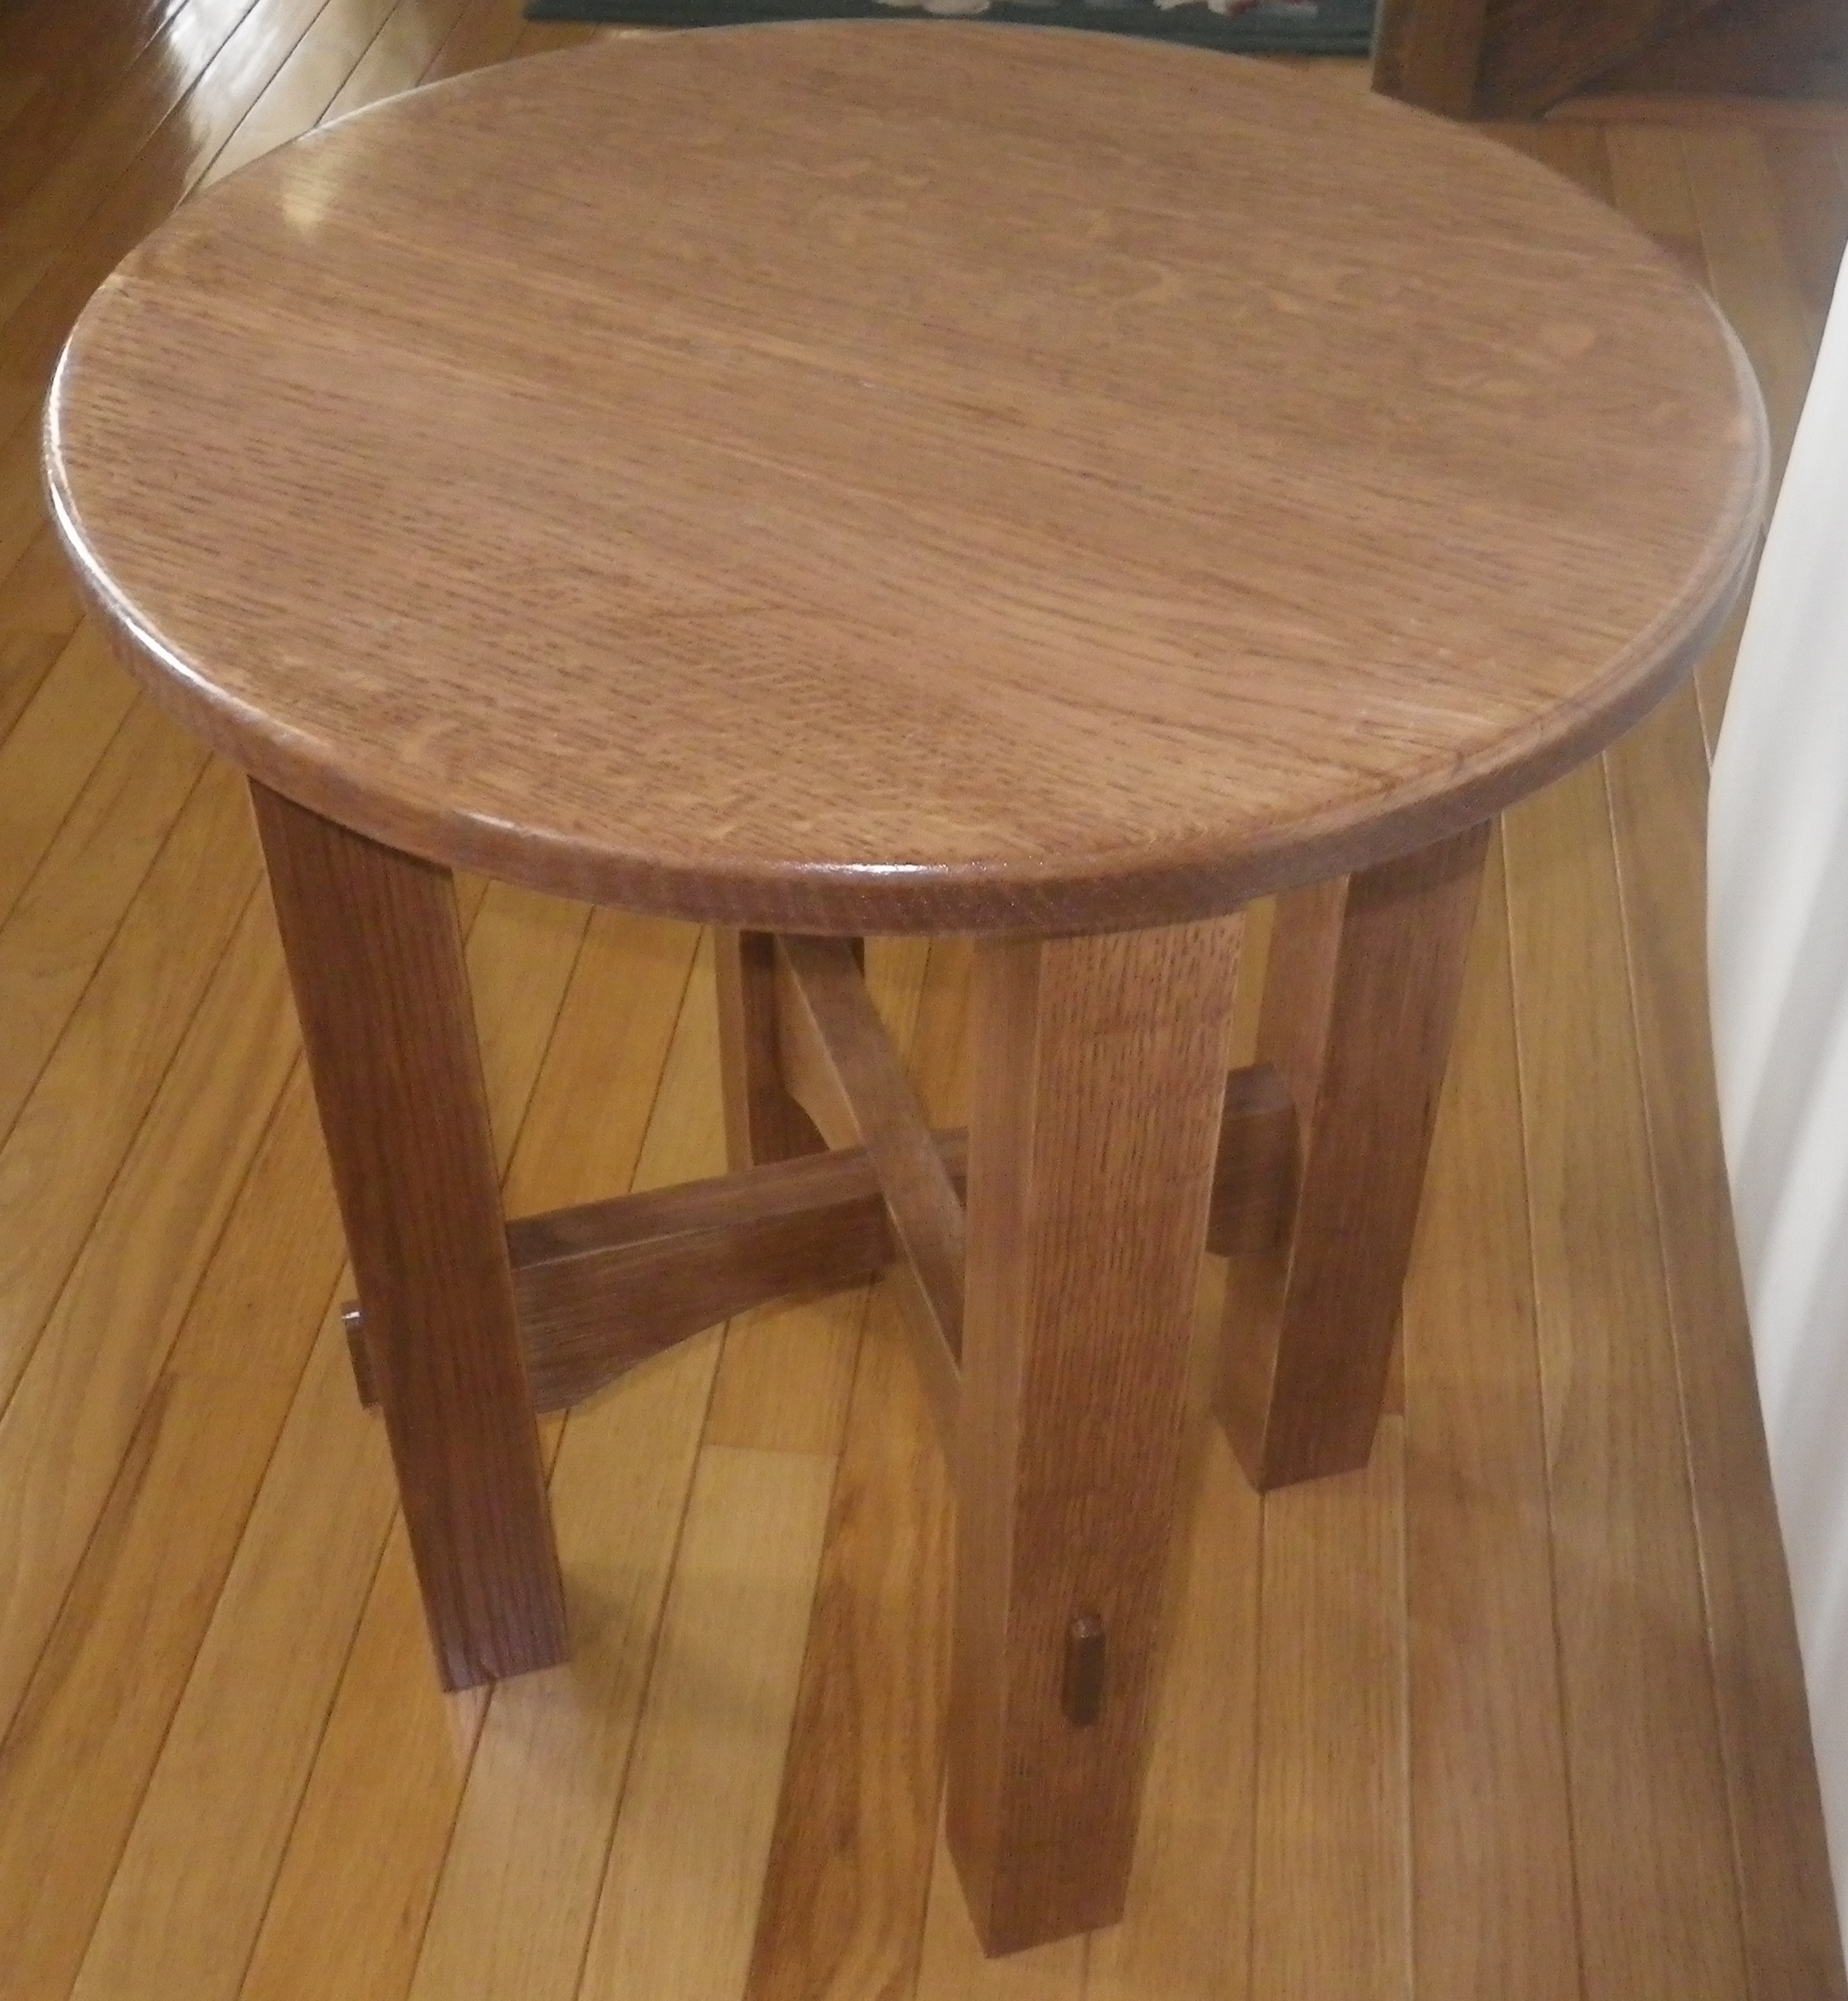 Reproduction of Stickley Tabouret #603